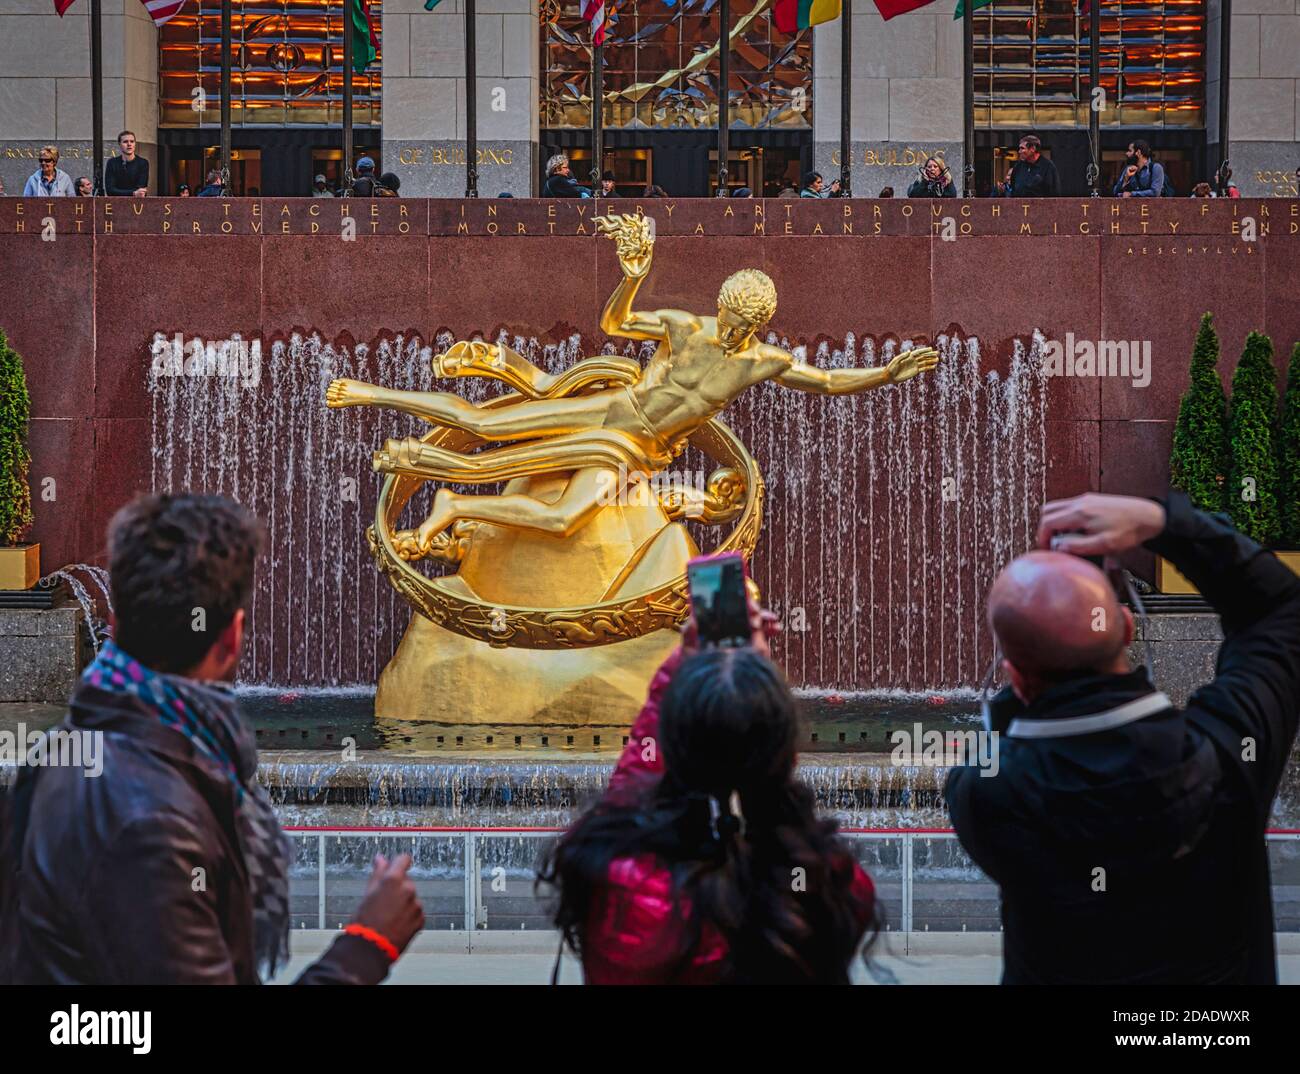 Statue of Prometheus in the lower plaza of the Rockefeller Center, Manhattan, New York, New York State, United States of America. The gilded bronze st Stock Photo